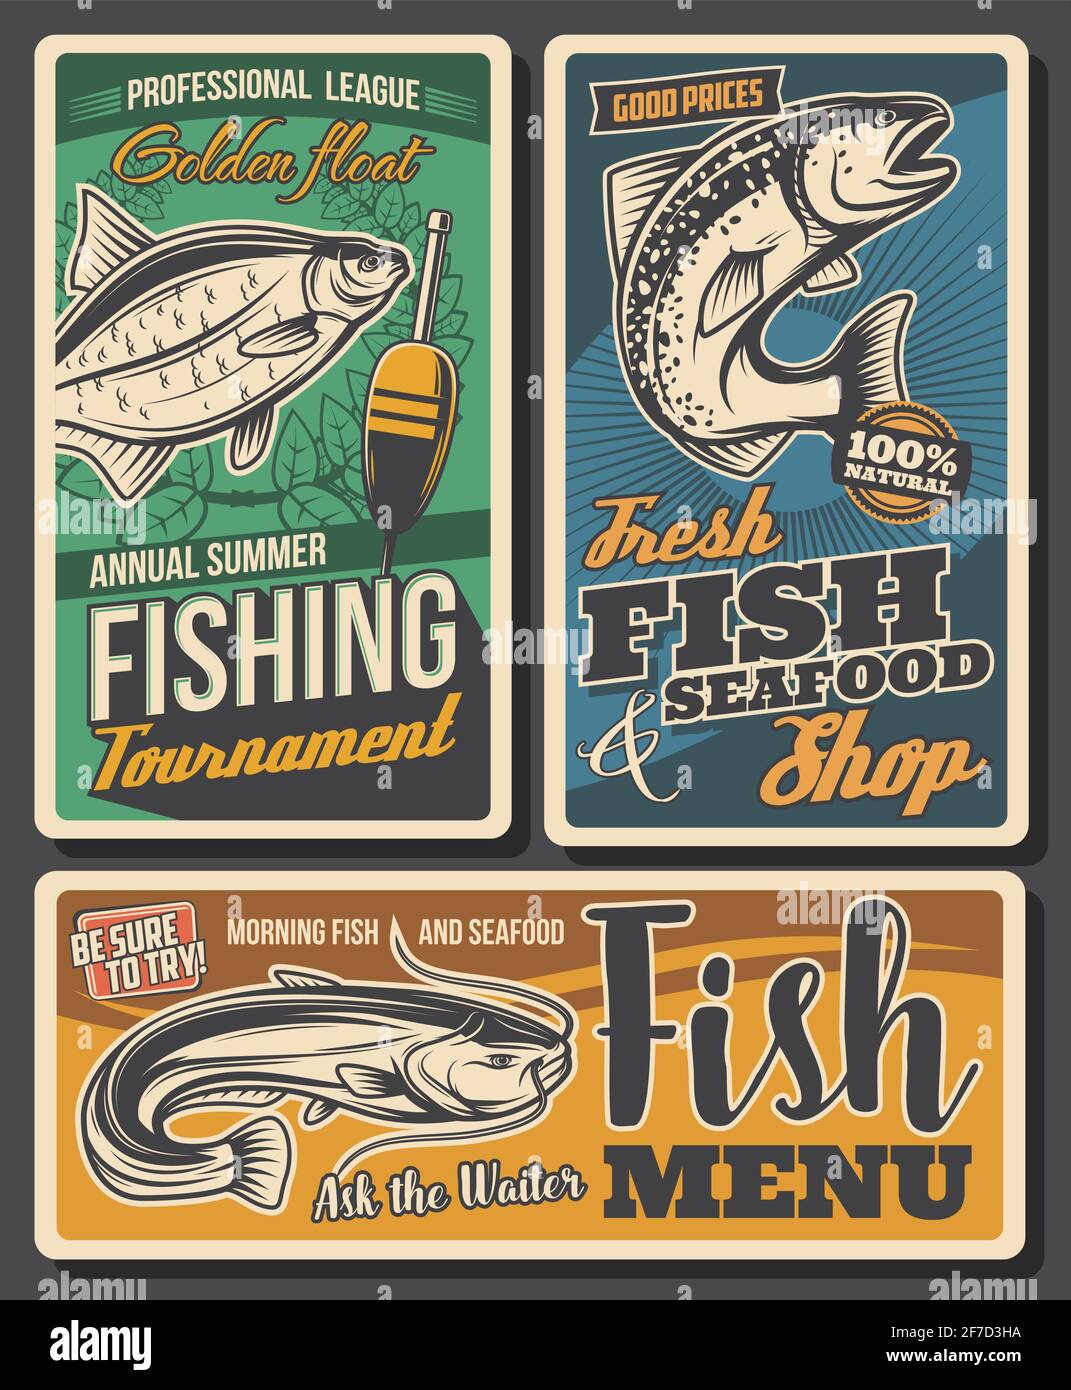 Fishing tournament, seafood shop vector banners Stock Vector